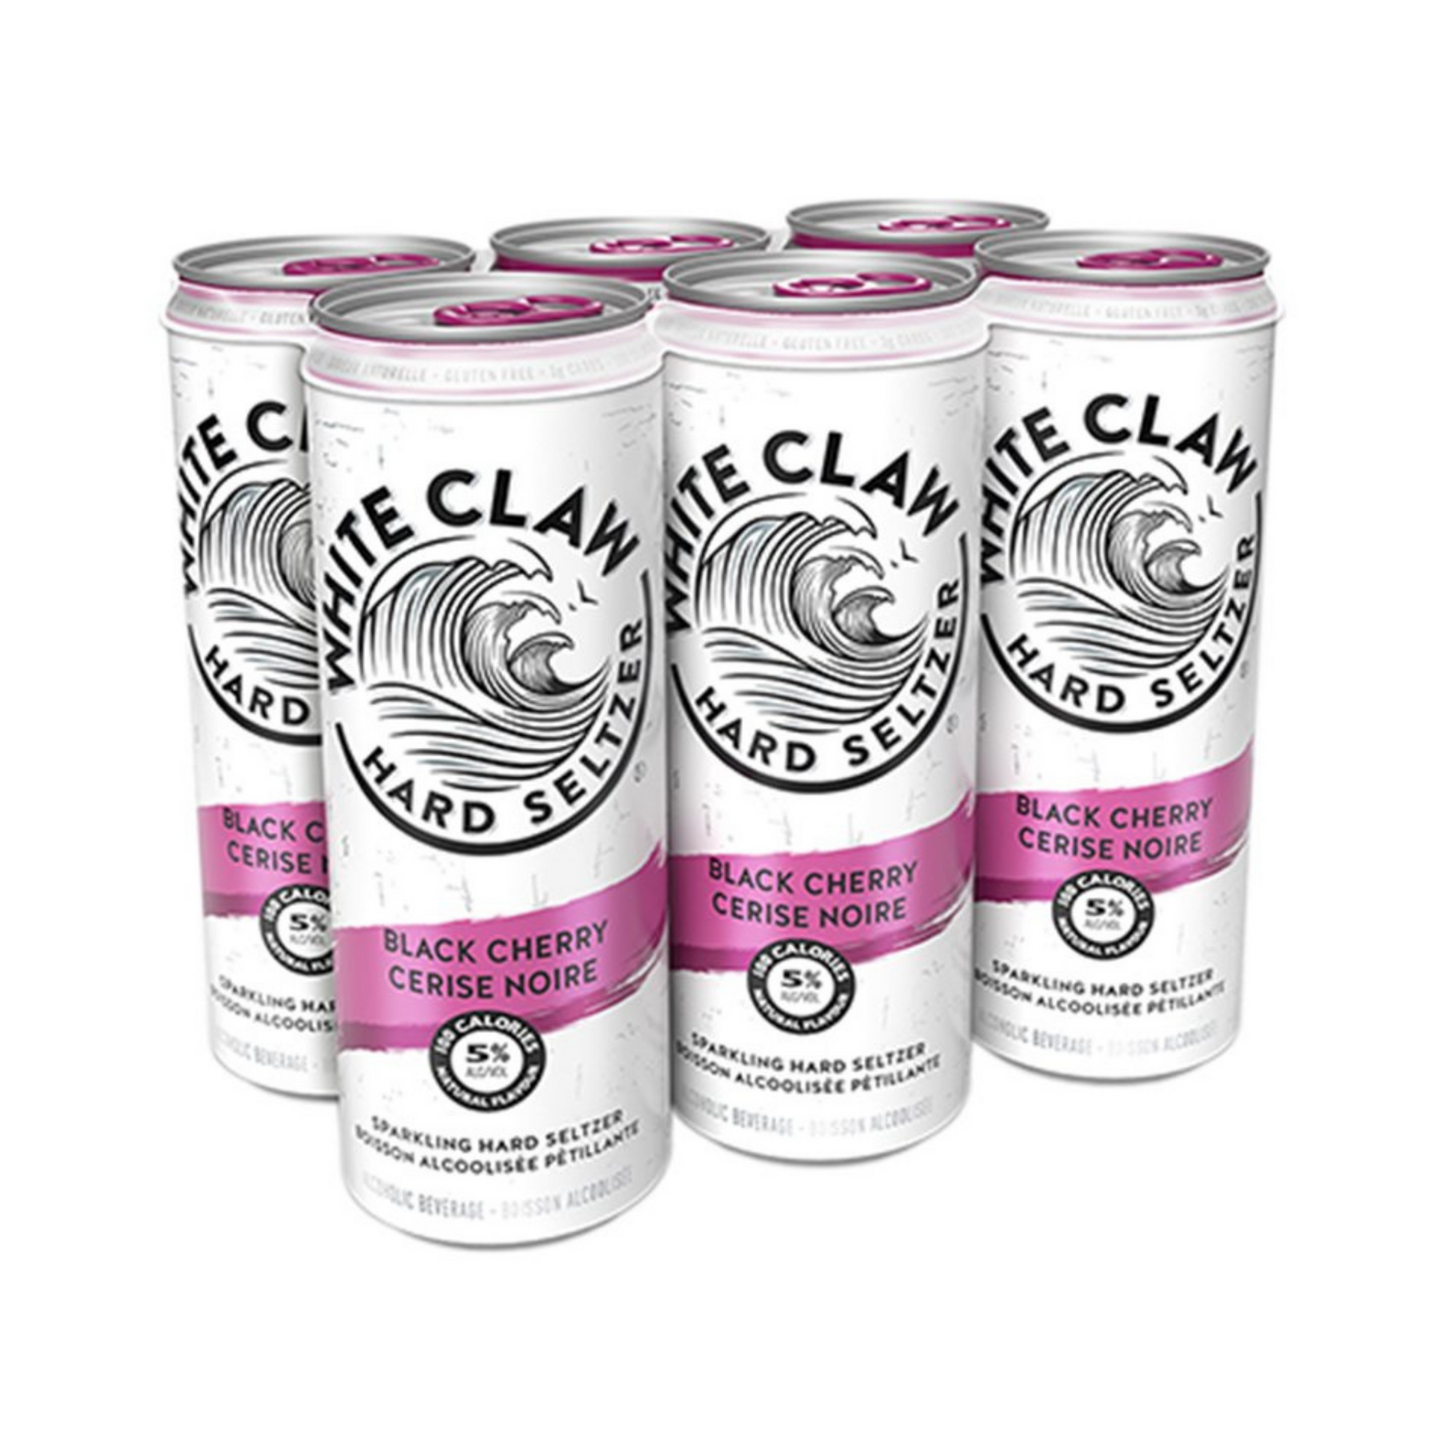 White Claw, Hard Seltzer, Black Cherry, 6 Pack 355ml Cans